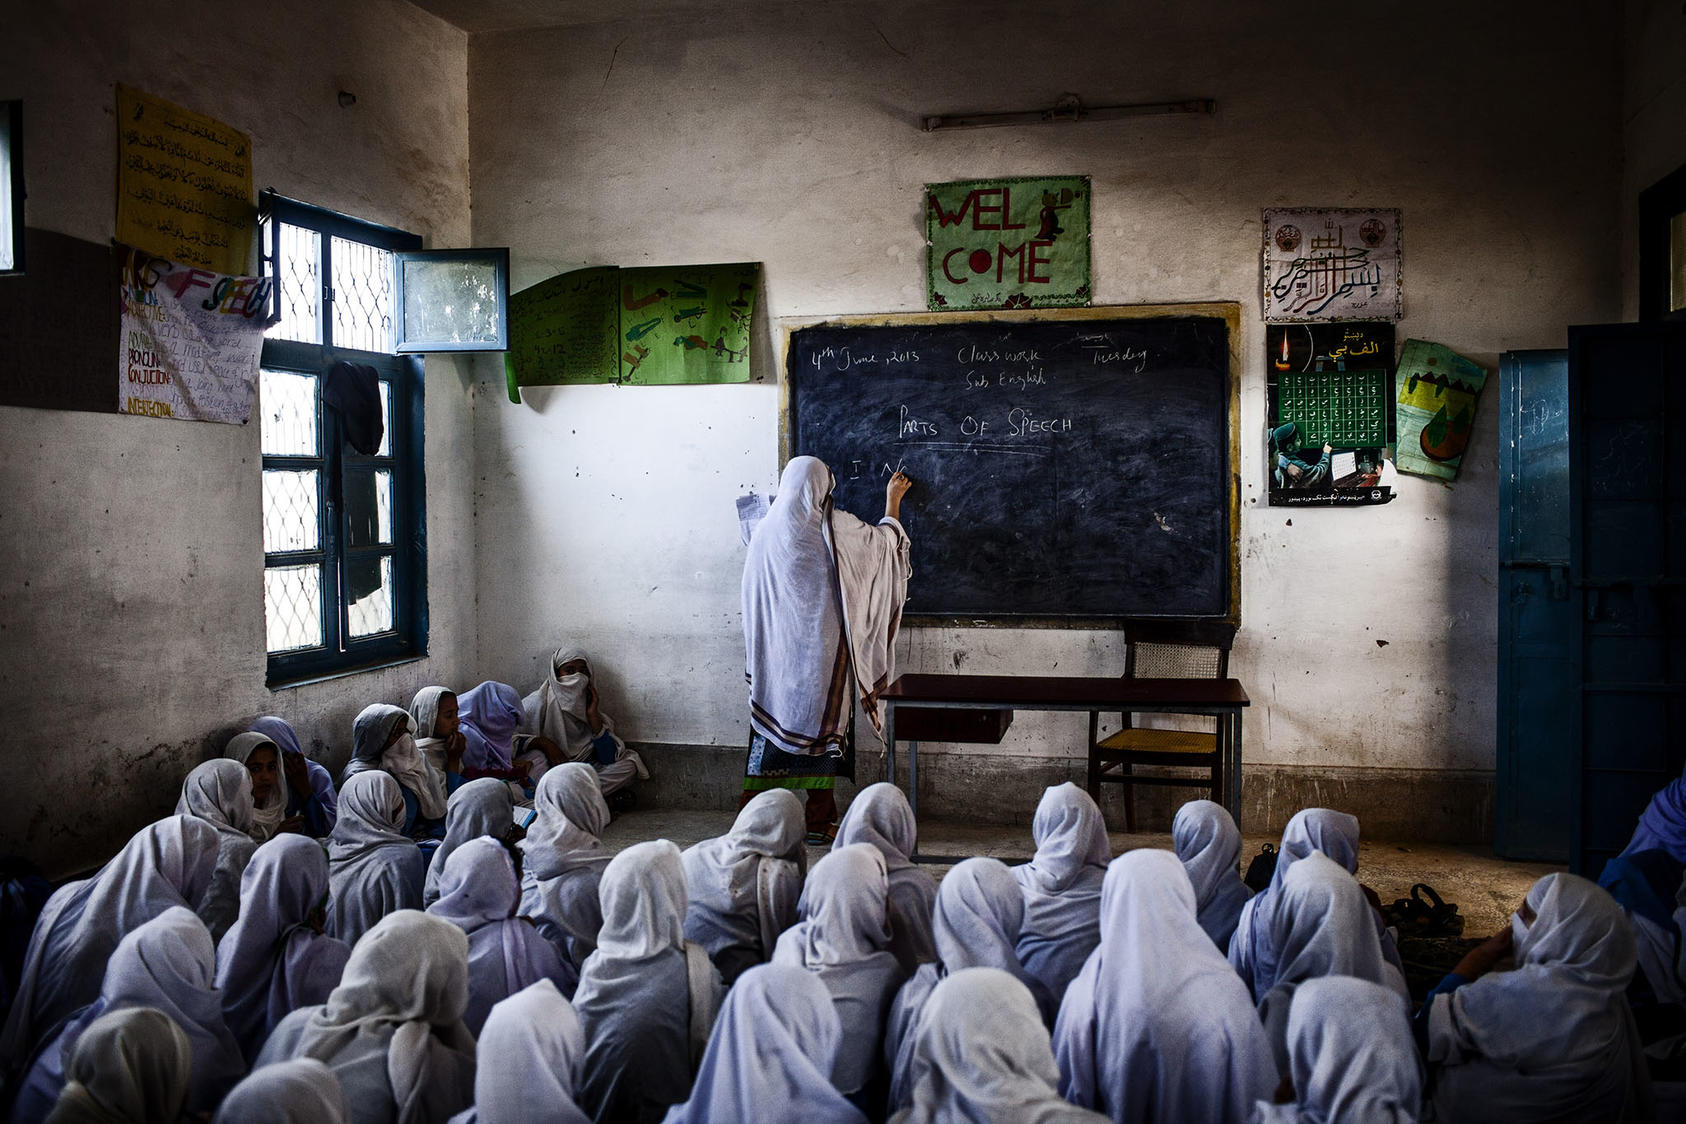 Female students during a class at a school in Nowshera, Pakistan, June 4, 2013. (Diego Ibarra Sanchez/The New York Times)